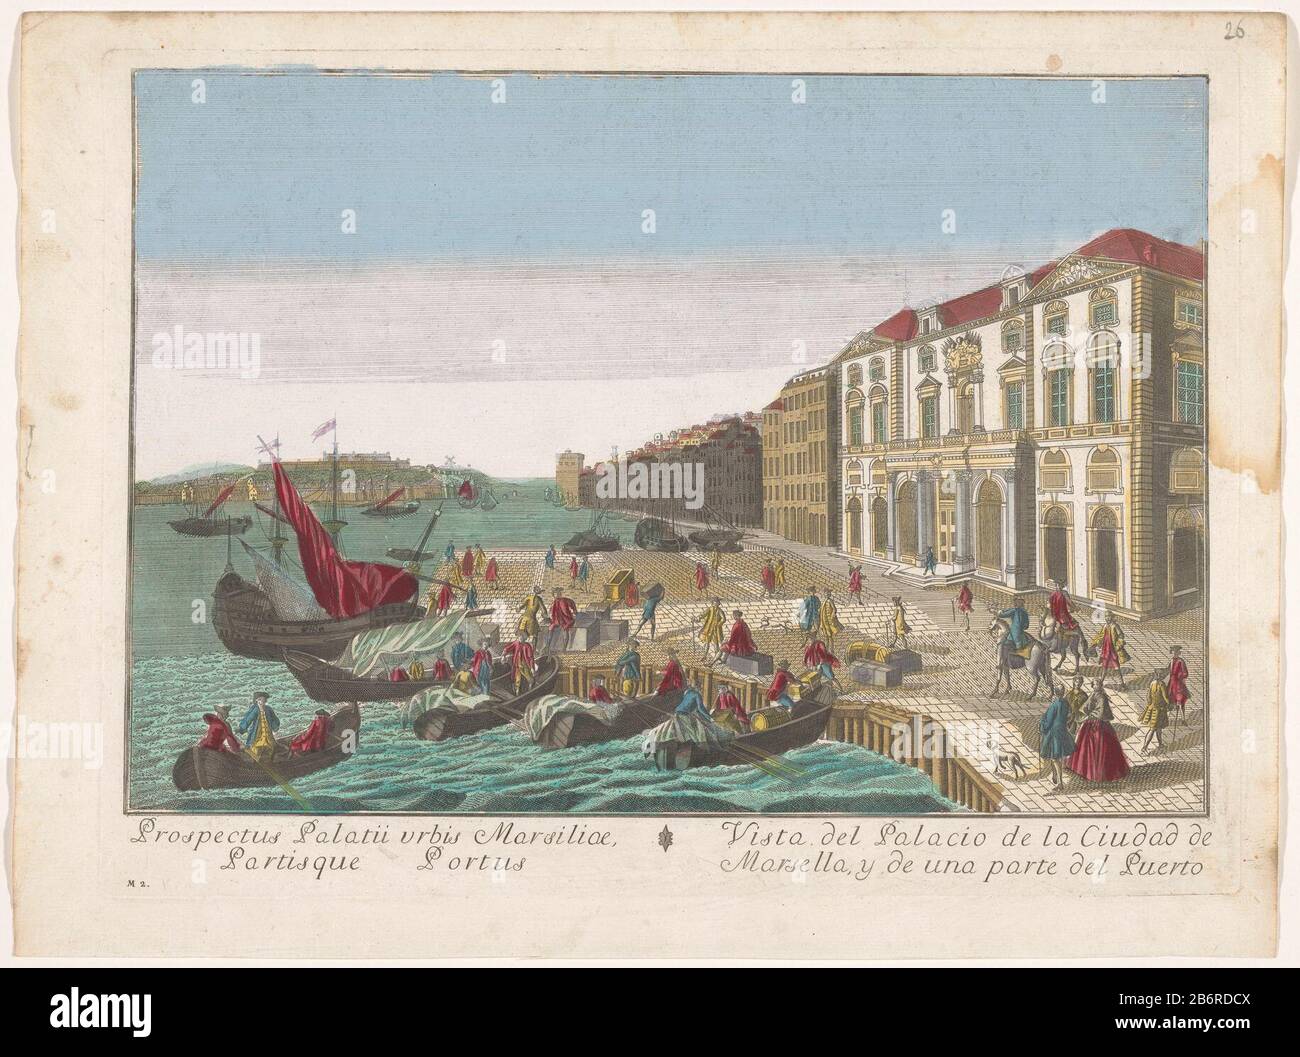 Gezicht op het Stadhuis en de haven te Marseille Vista del Palacio de la Ciudad de Marsella, y de una parte del puerto (titel op object) On water are ships and boats. On the right are groups of figures with goods on the waterfront. Bottom left numbered M 2. Manufacturer : publisher: family Remondini (attributed to) printmaker: anonymous place manufacture: Publisher: Bassano del Grappa Print Author: Italy Date: 1700 - 1799 Physical features: colored etching material: paper watercolor technique: Etching / brush dimensions: plate edge: H 315 mm b × 424 mm Subject: sea (seascape) (+ landscape with Stock Photo